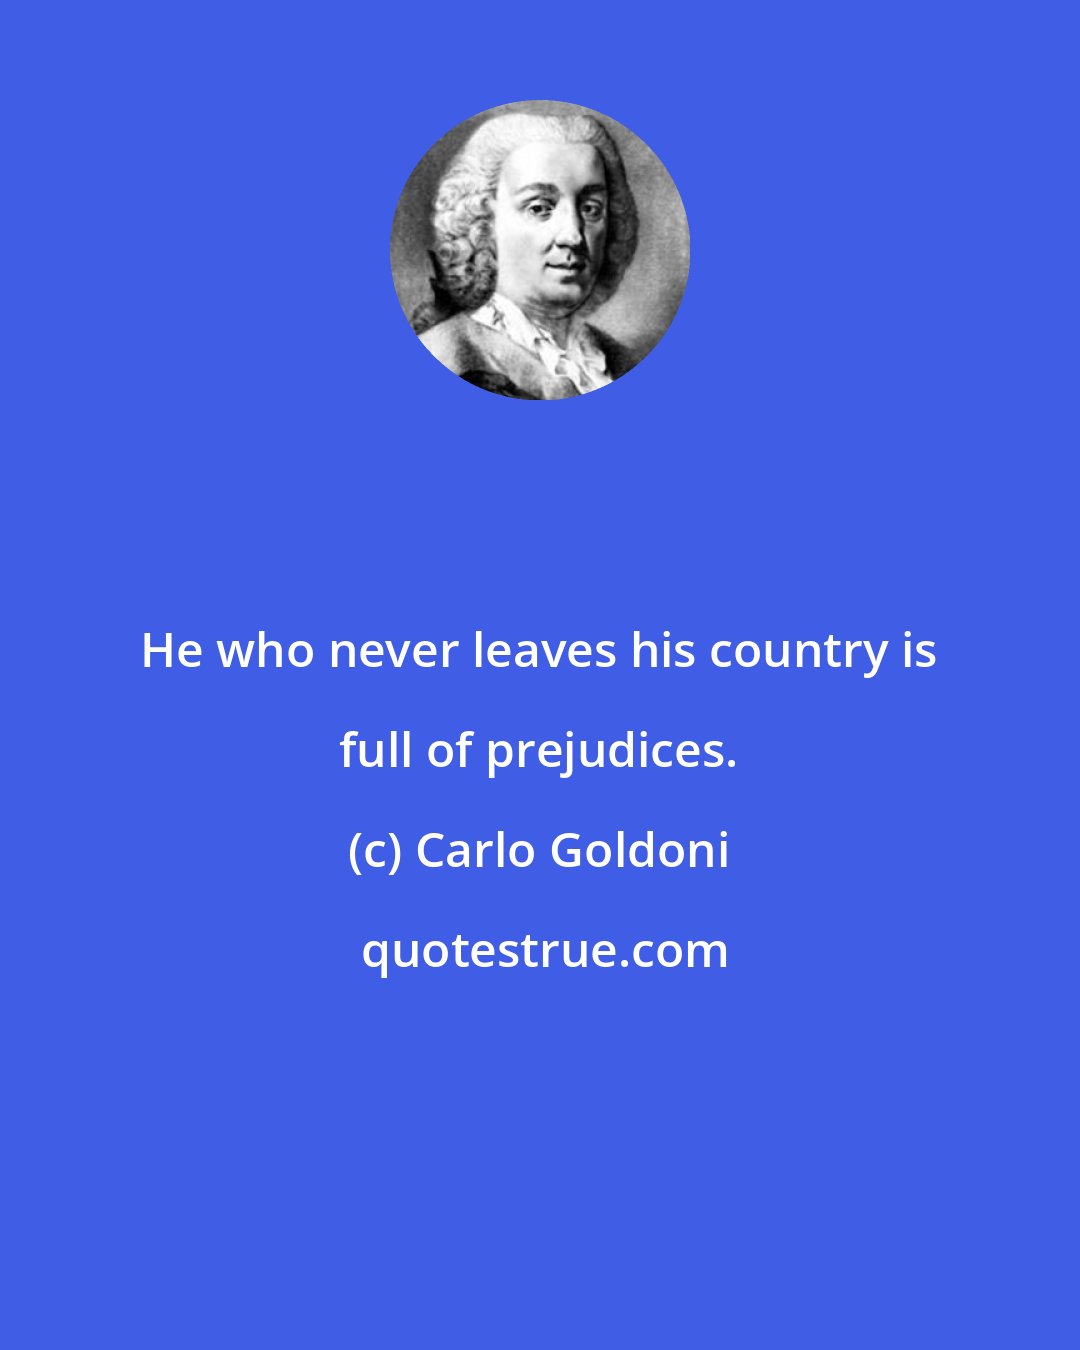 Carlo Goldoni: He who never leaves his country is full of prejudices.